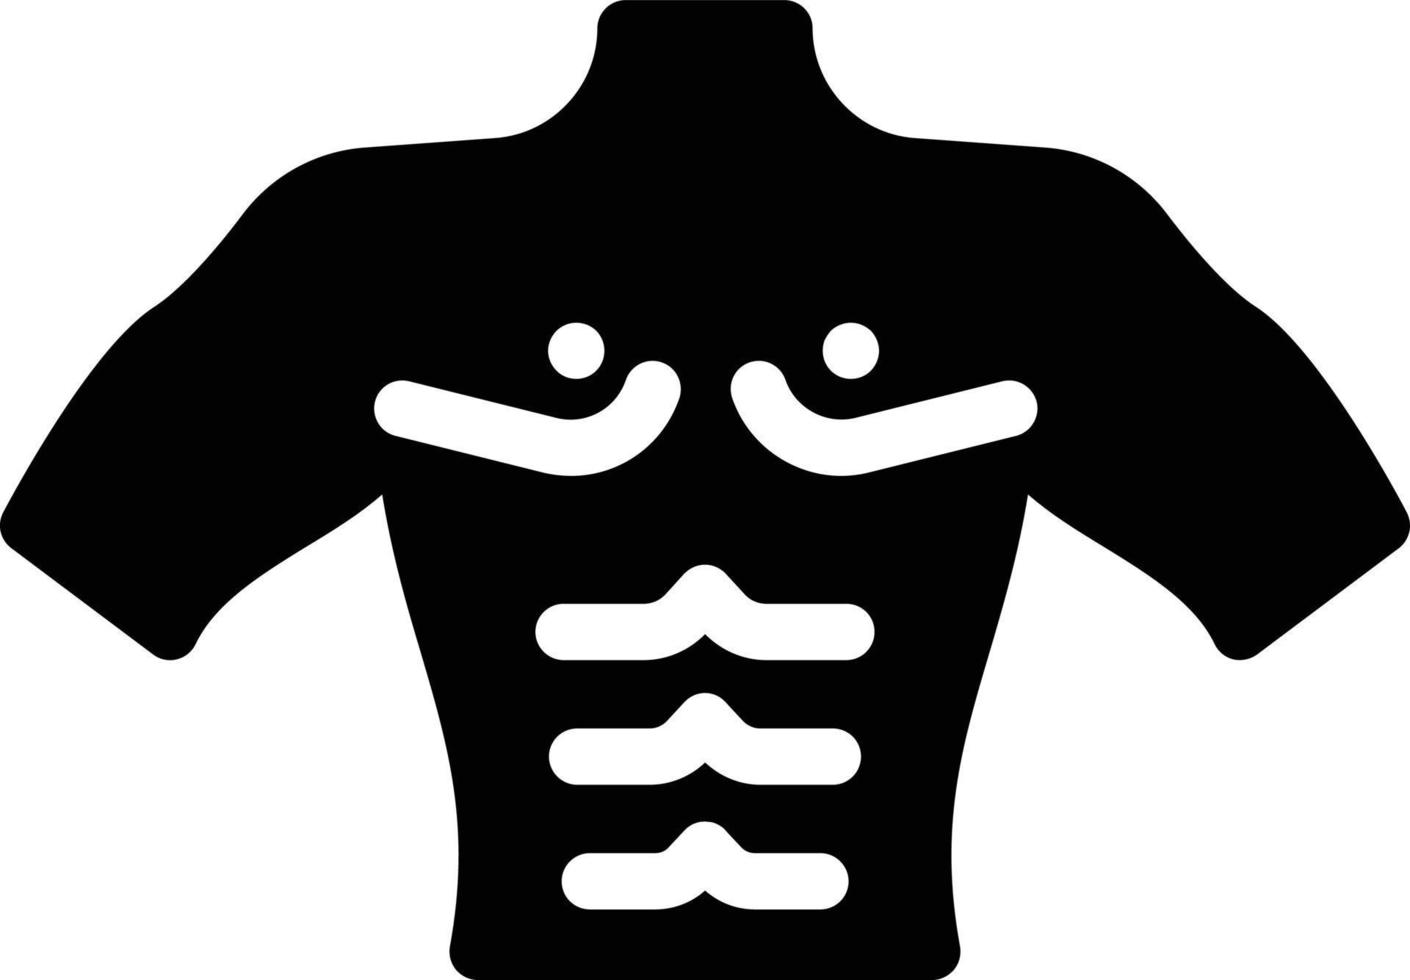 bodybuilder vector illustration on a background.Premium quality symbols.vector icons for concept and graphic design.